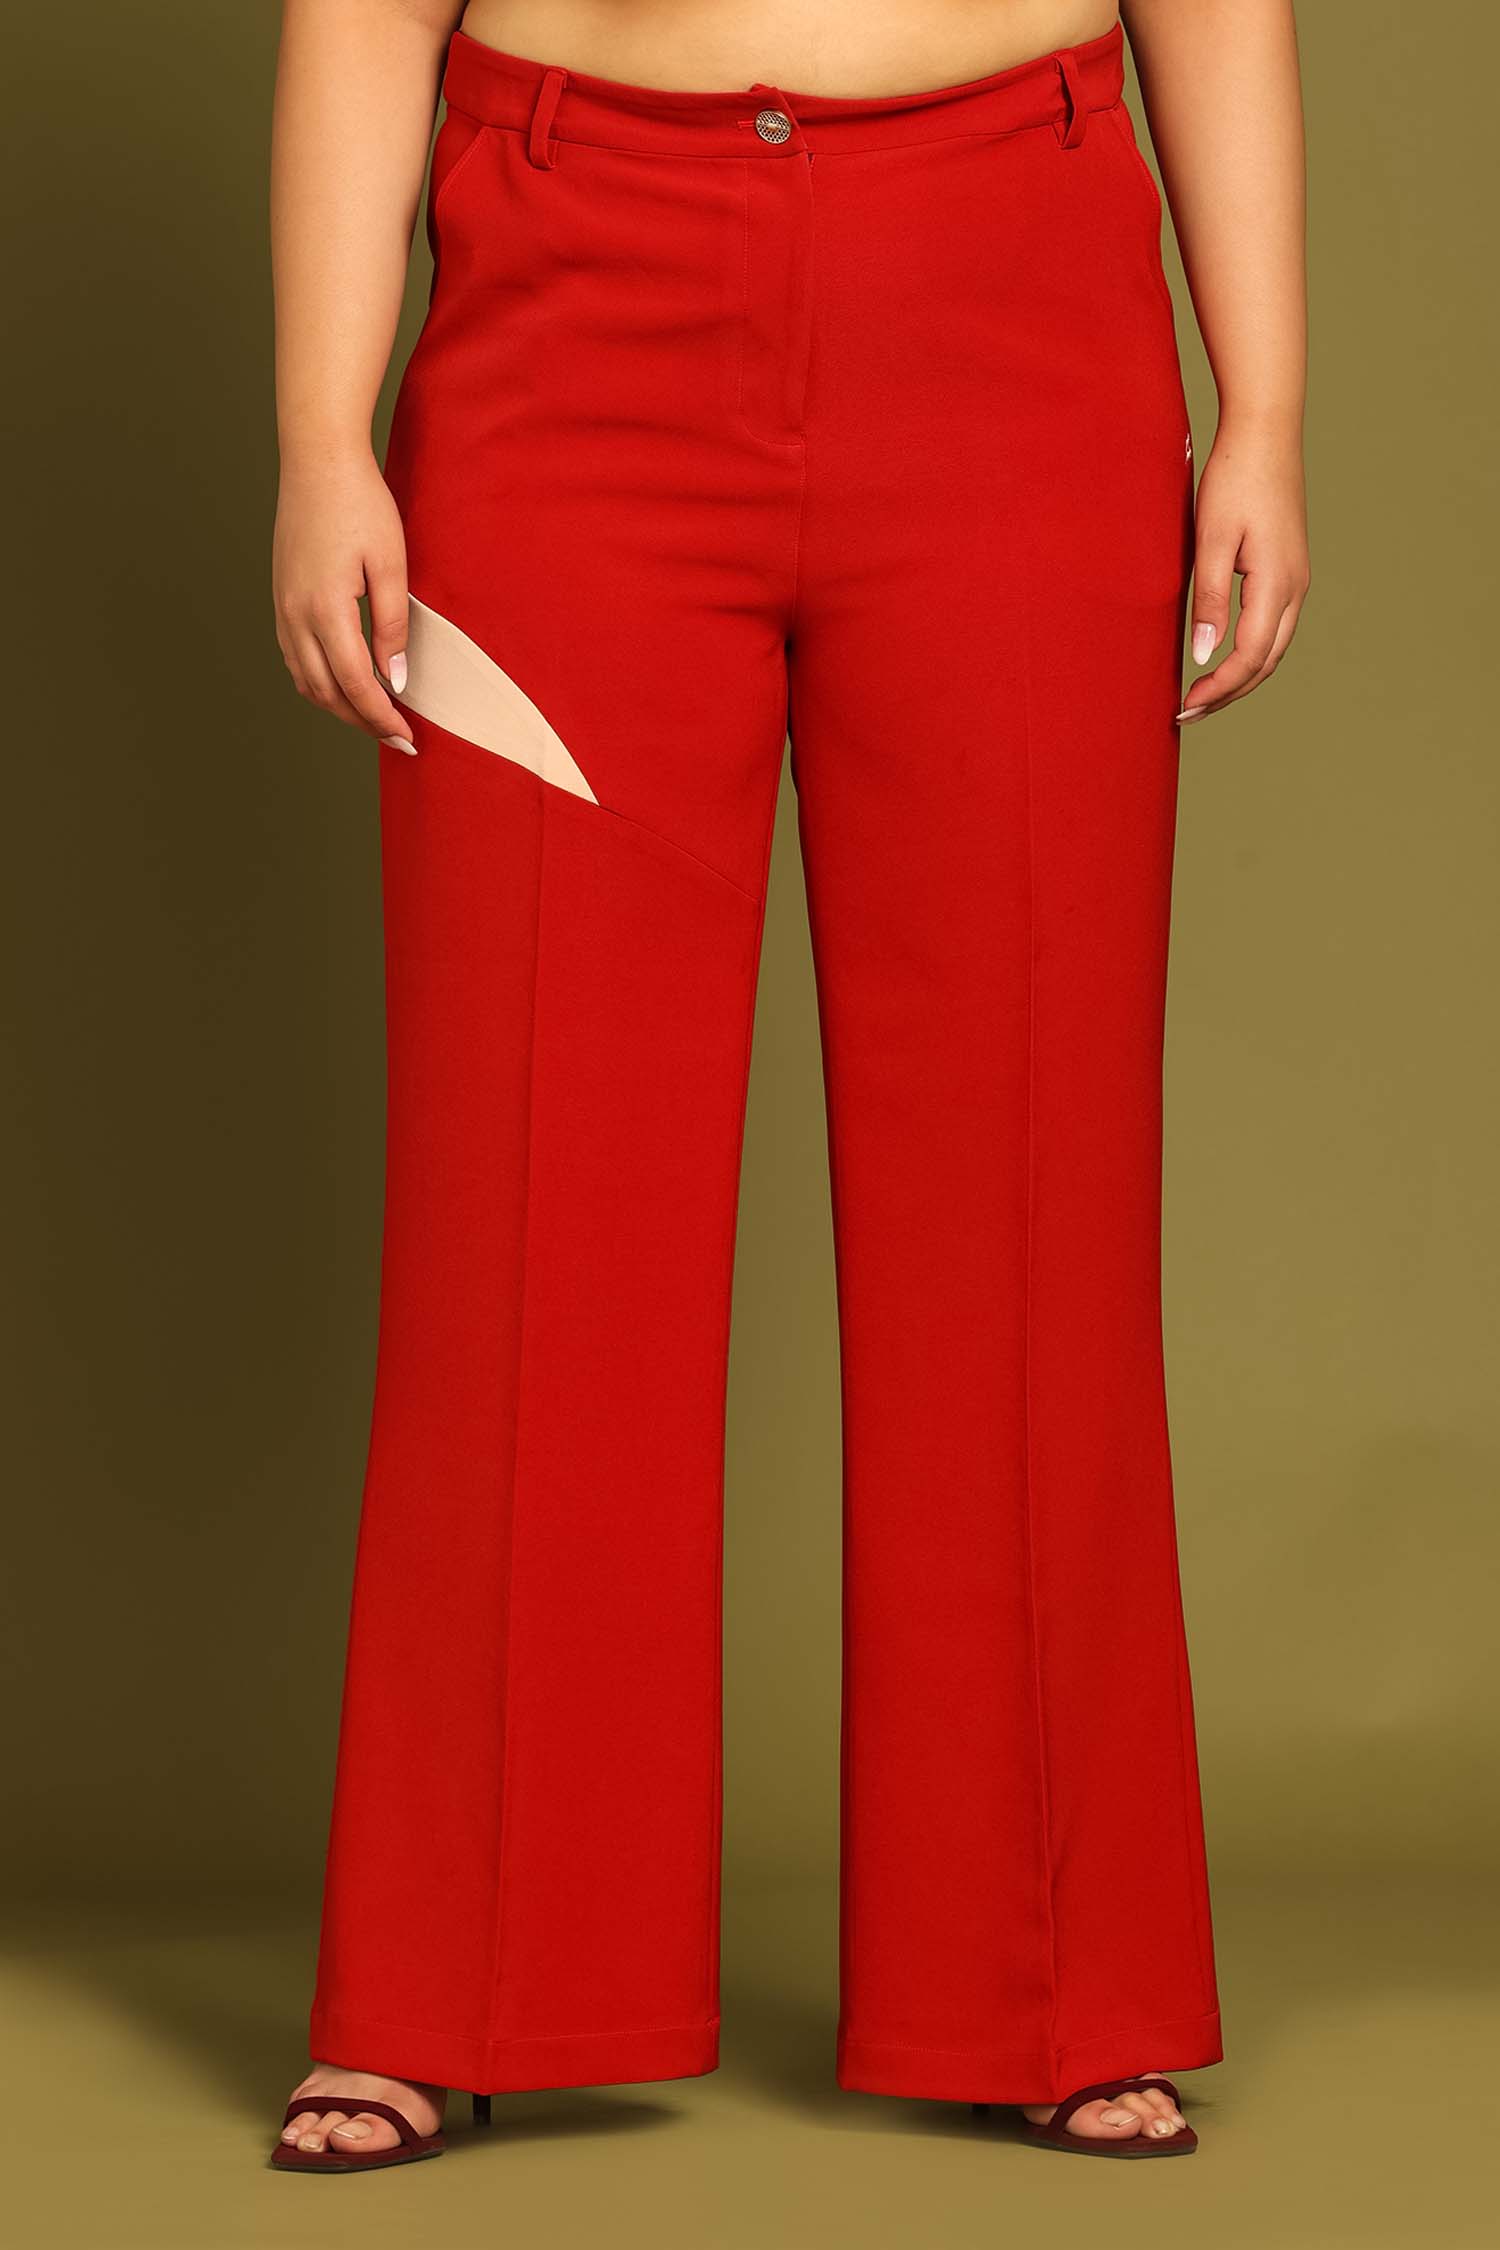 Chili Red Contrast Paneled Flared Trousers